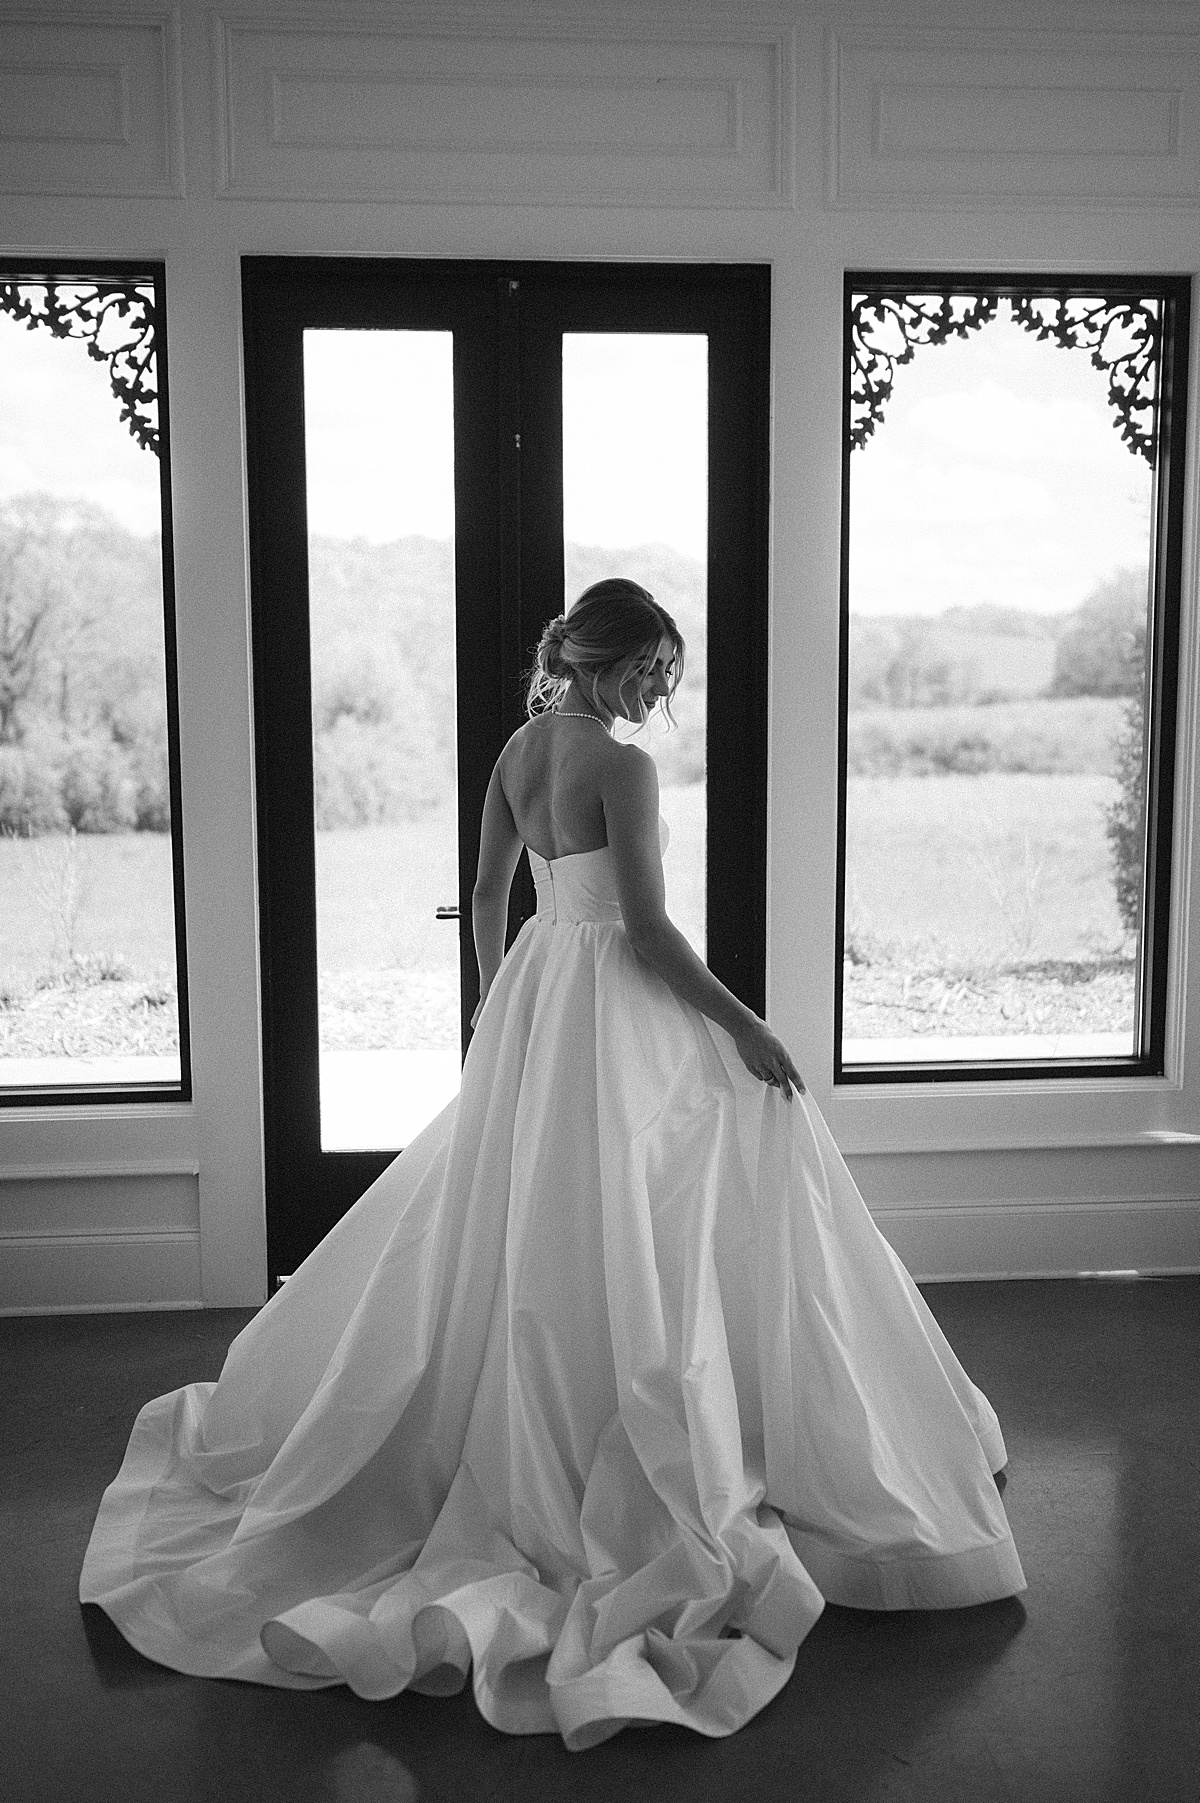 Romantic strapless fairytale wedding gown and bridal portrait. 